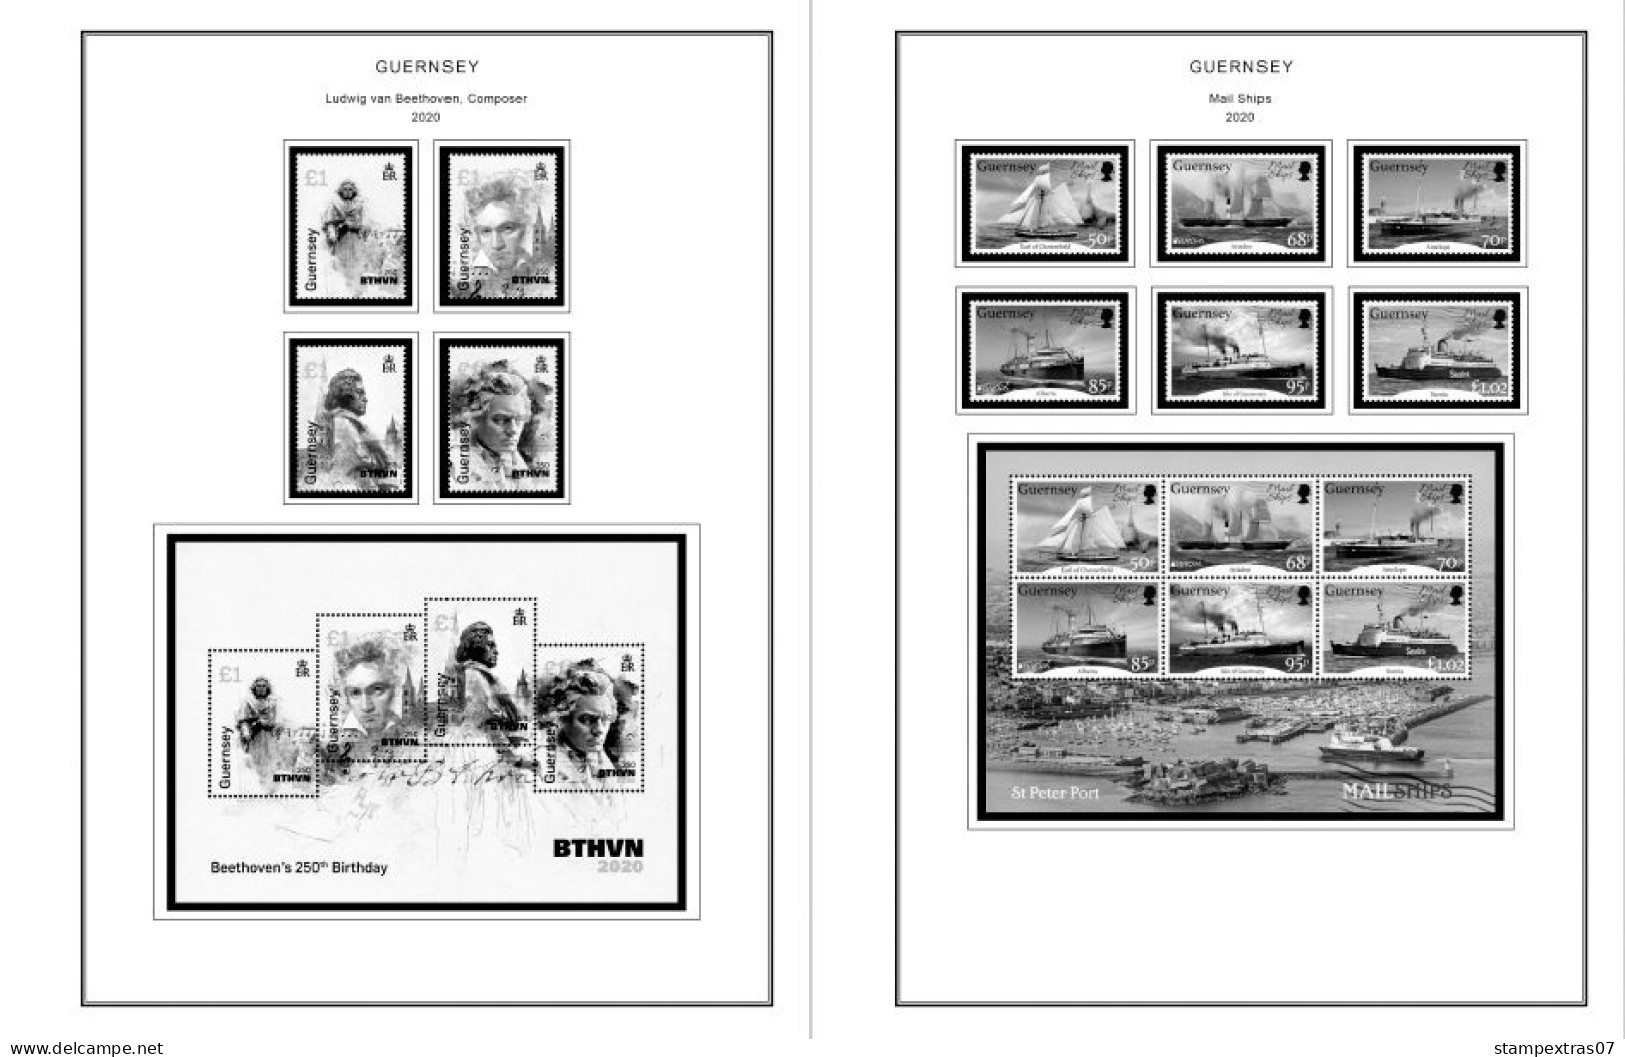 GB GUERNSEY 1958-2010 + 2011- 2020 STAMP ALBUM PAGES (212 b&w illustrated pages)